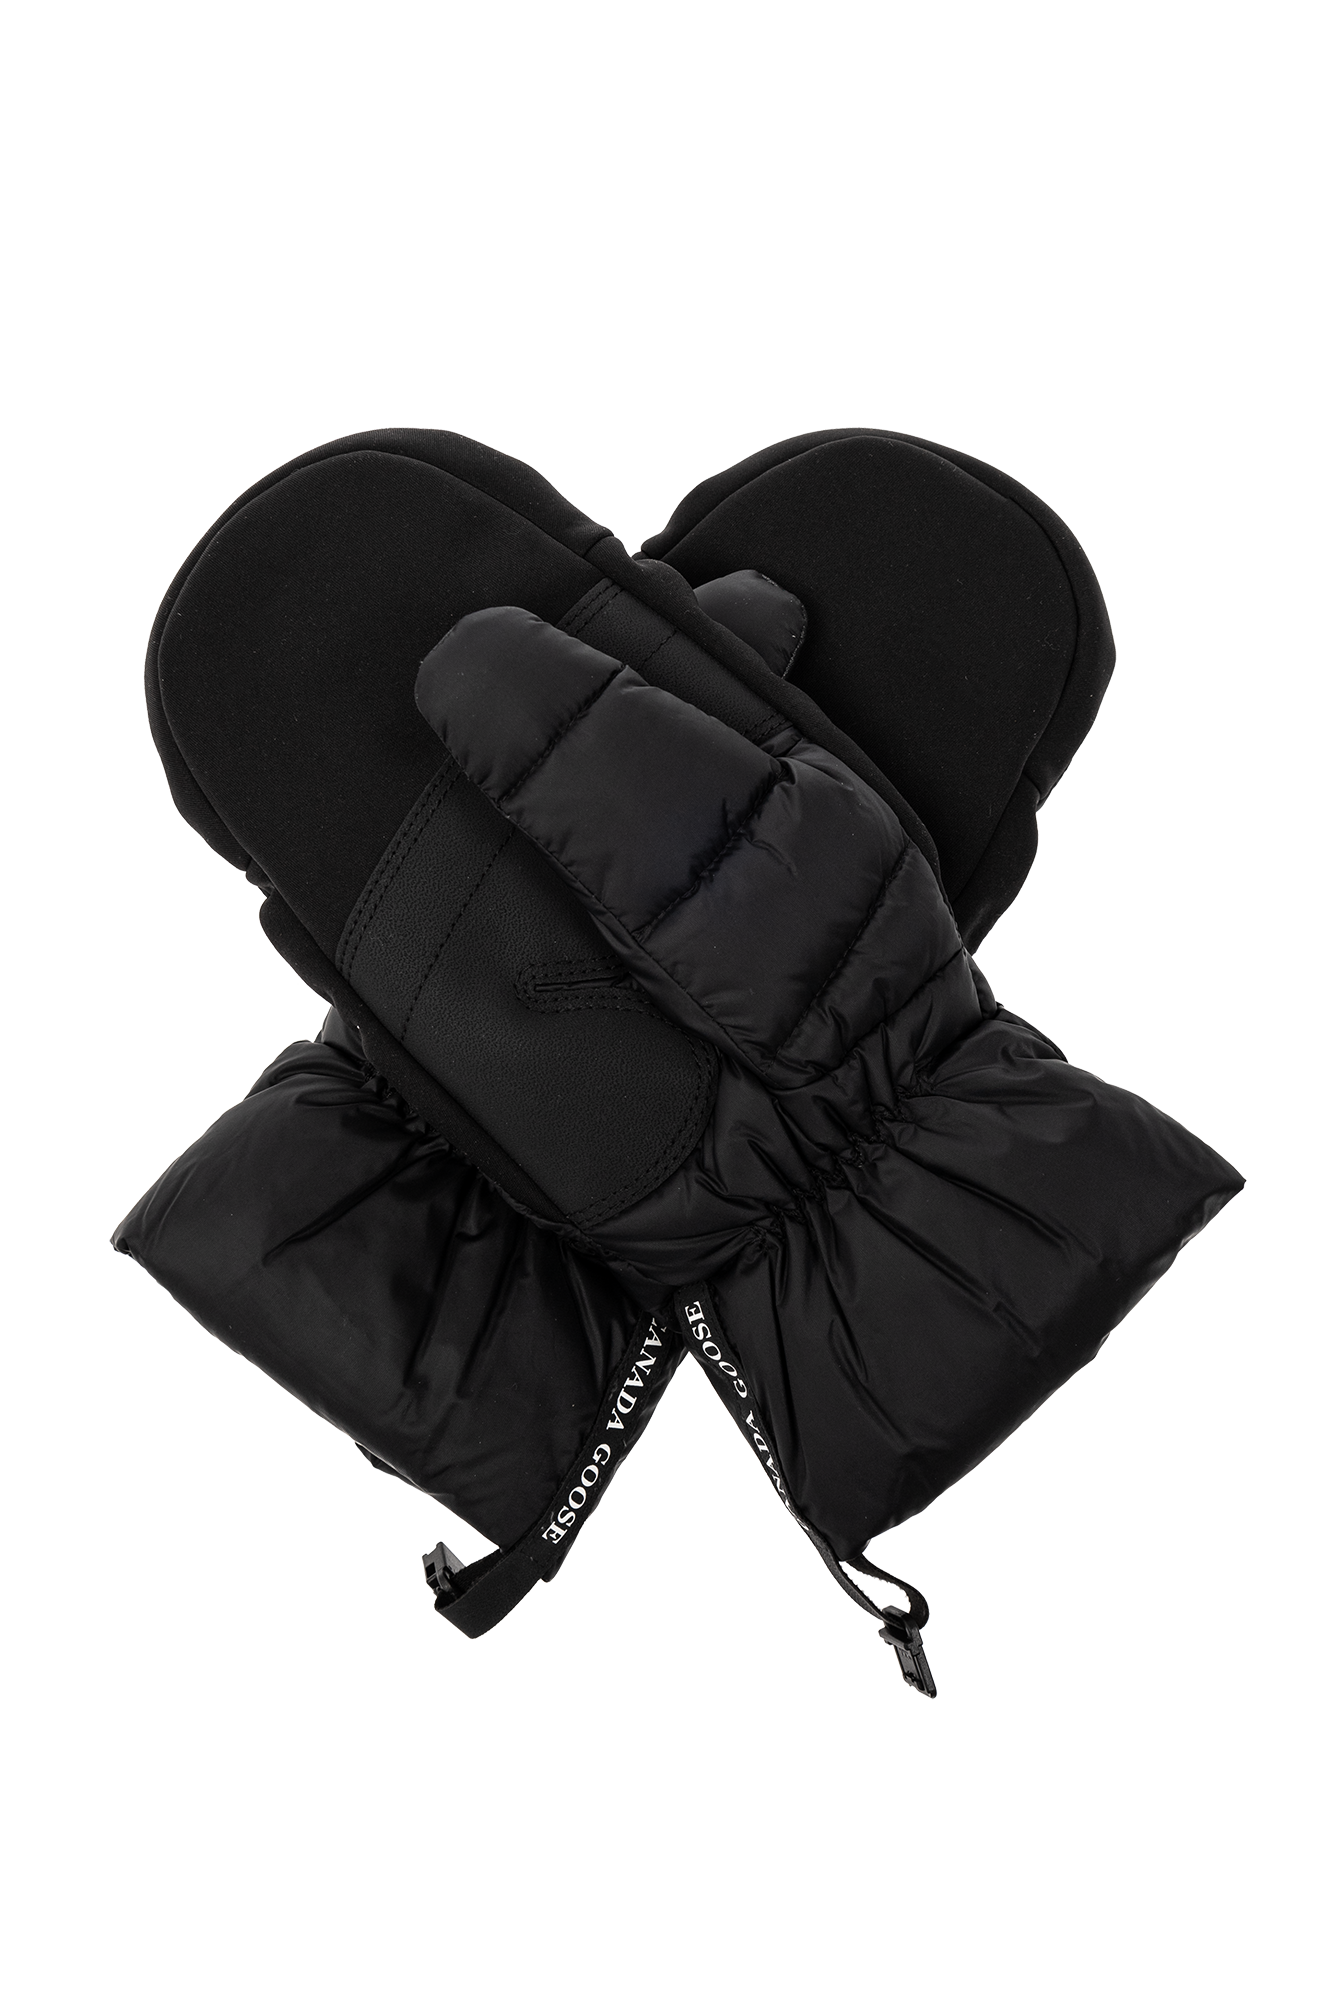 Black Insulated gloves with logo Canada Goose - Vitkac Canada